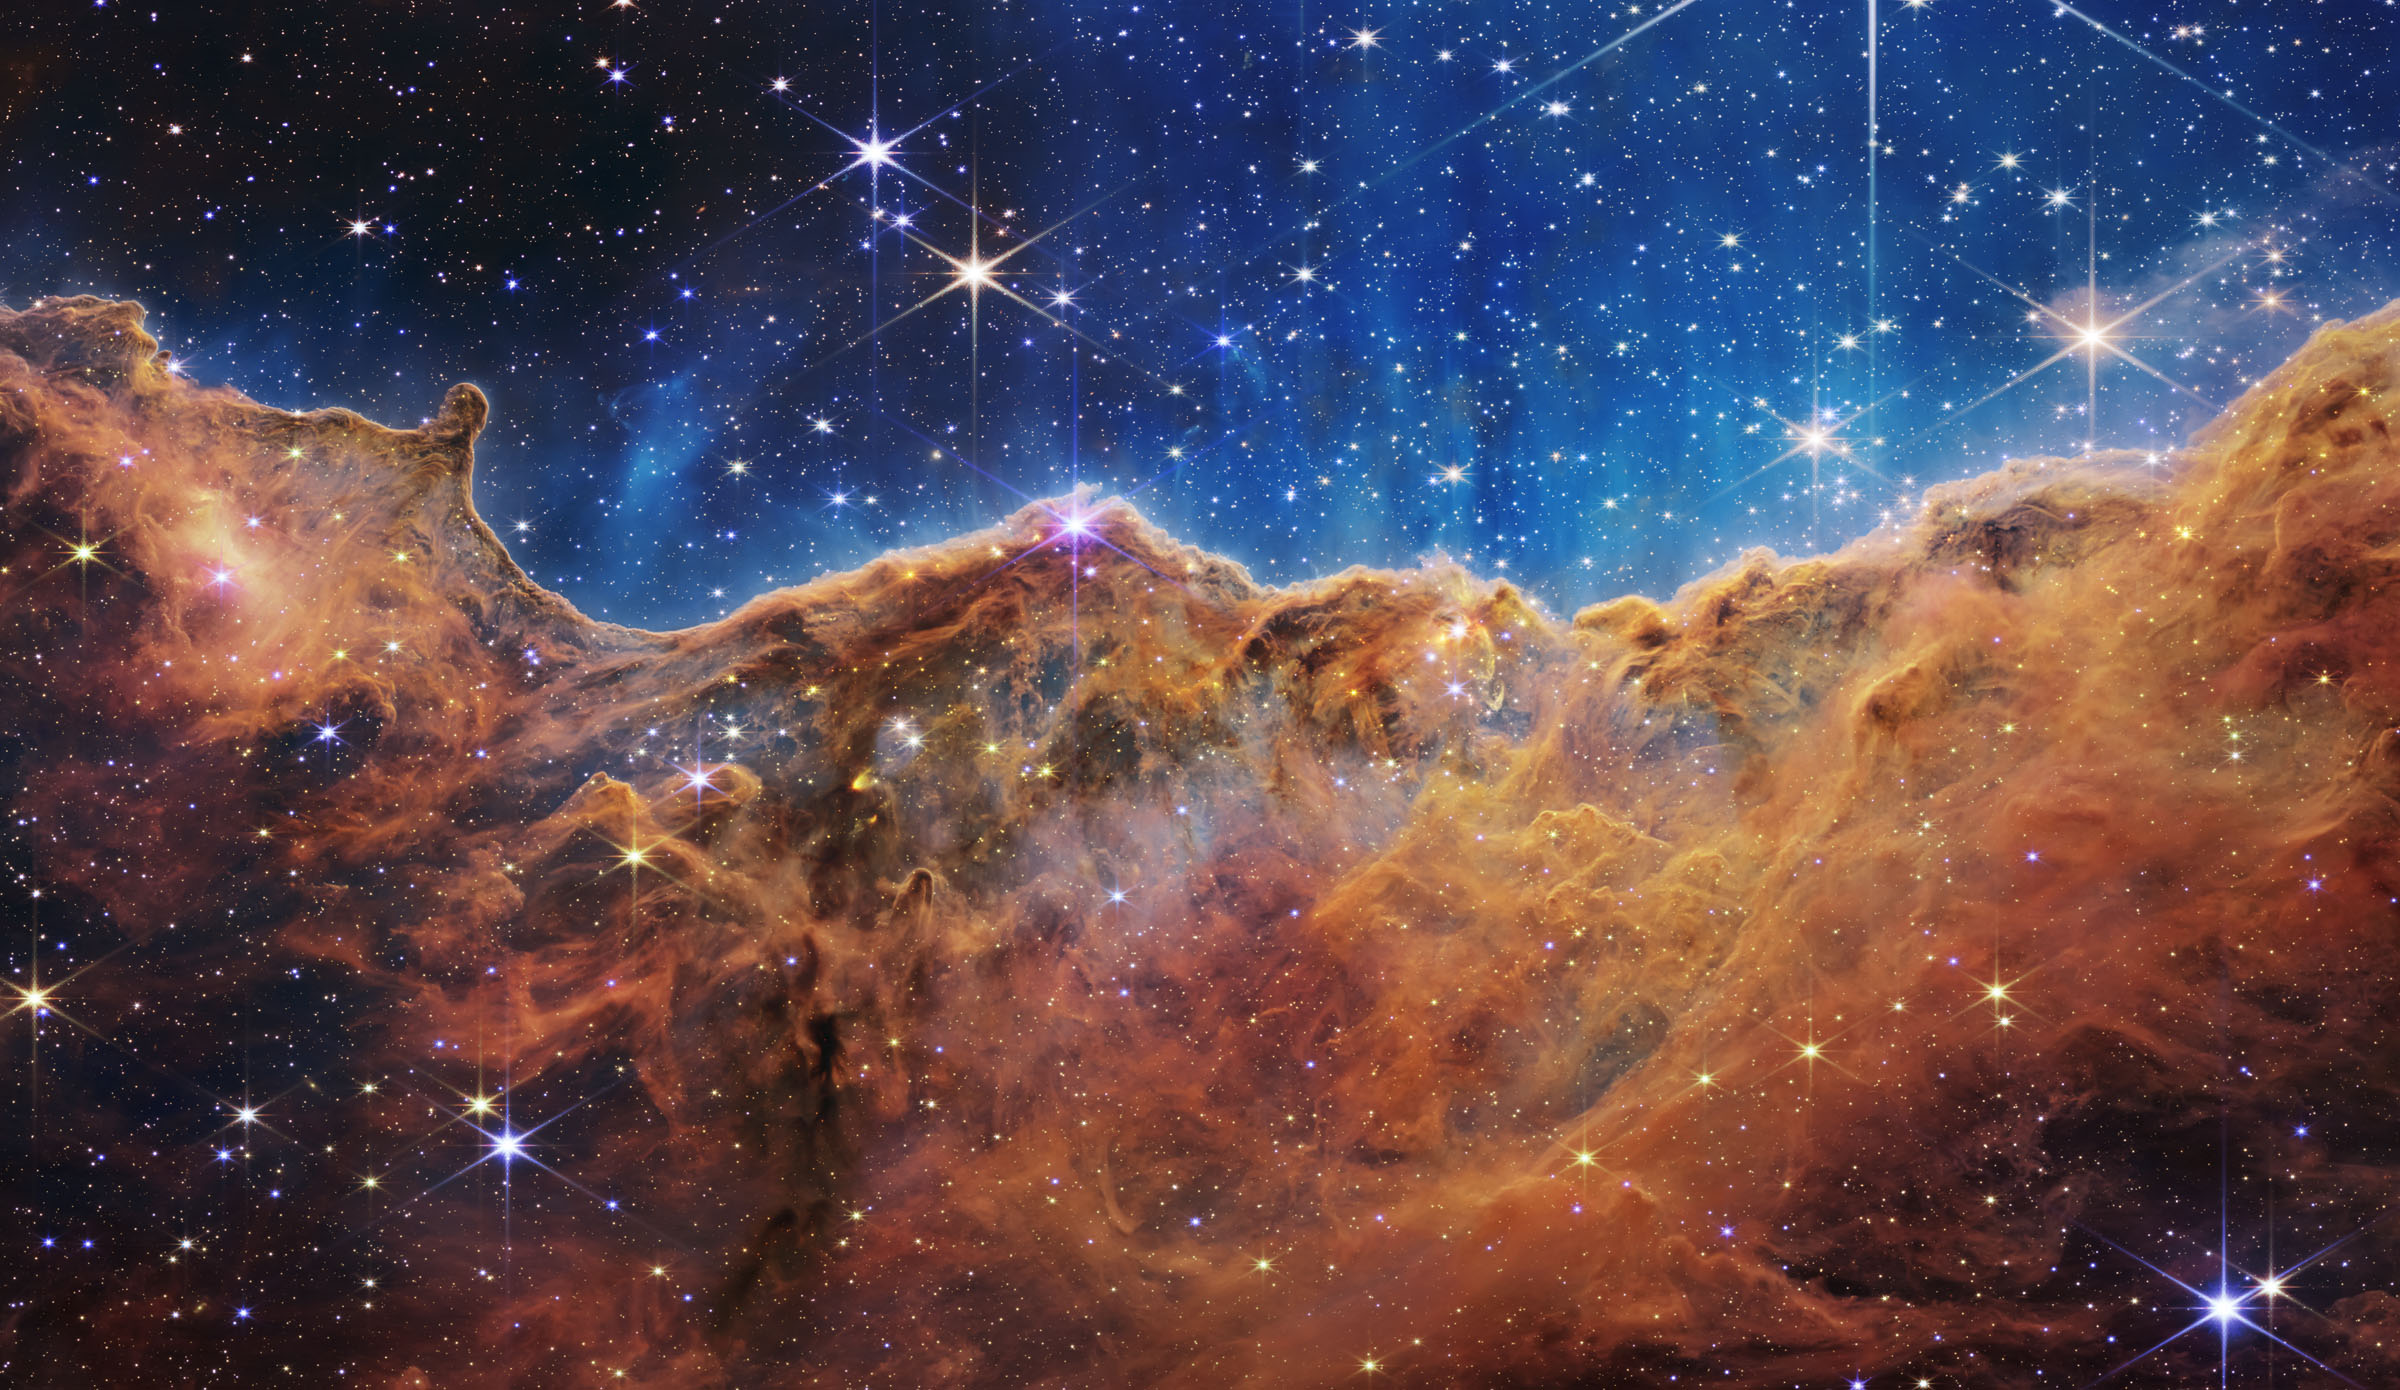 The edge of the Carina Nebula – a cloud of dense Hydrogen gas that is forming stars.